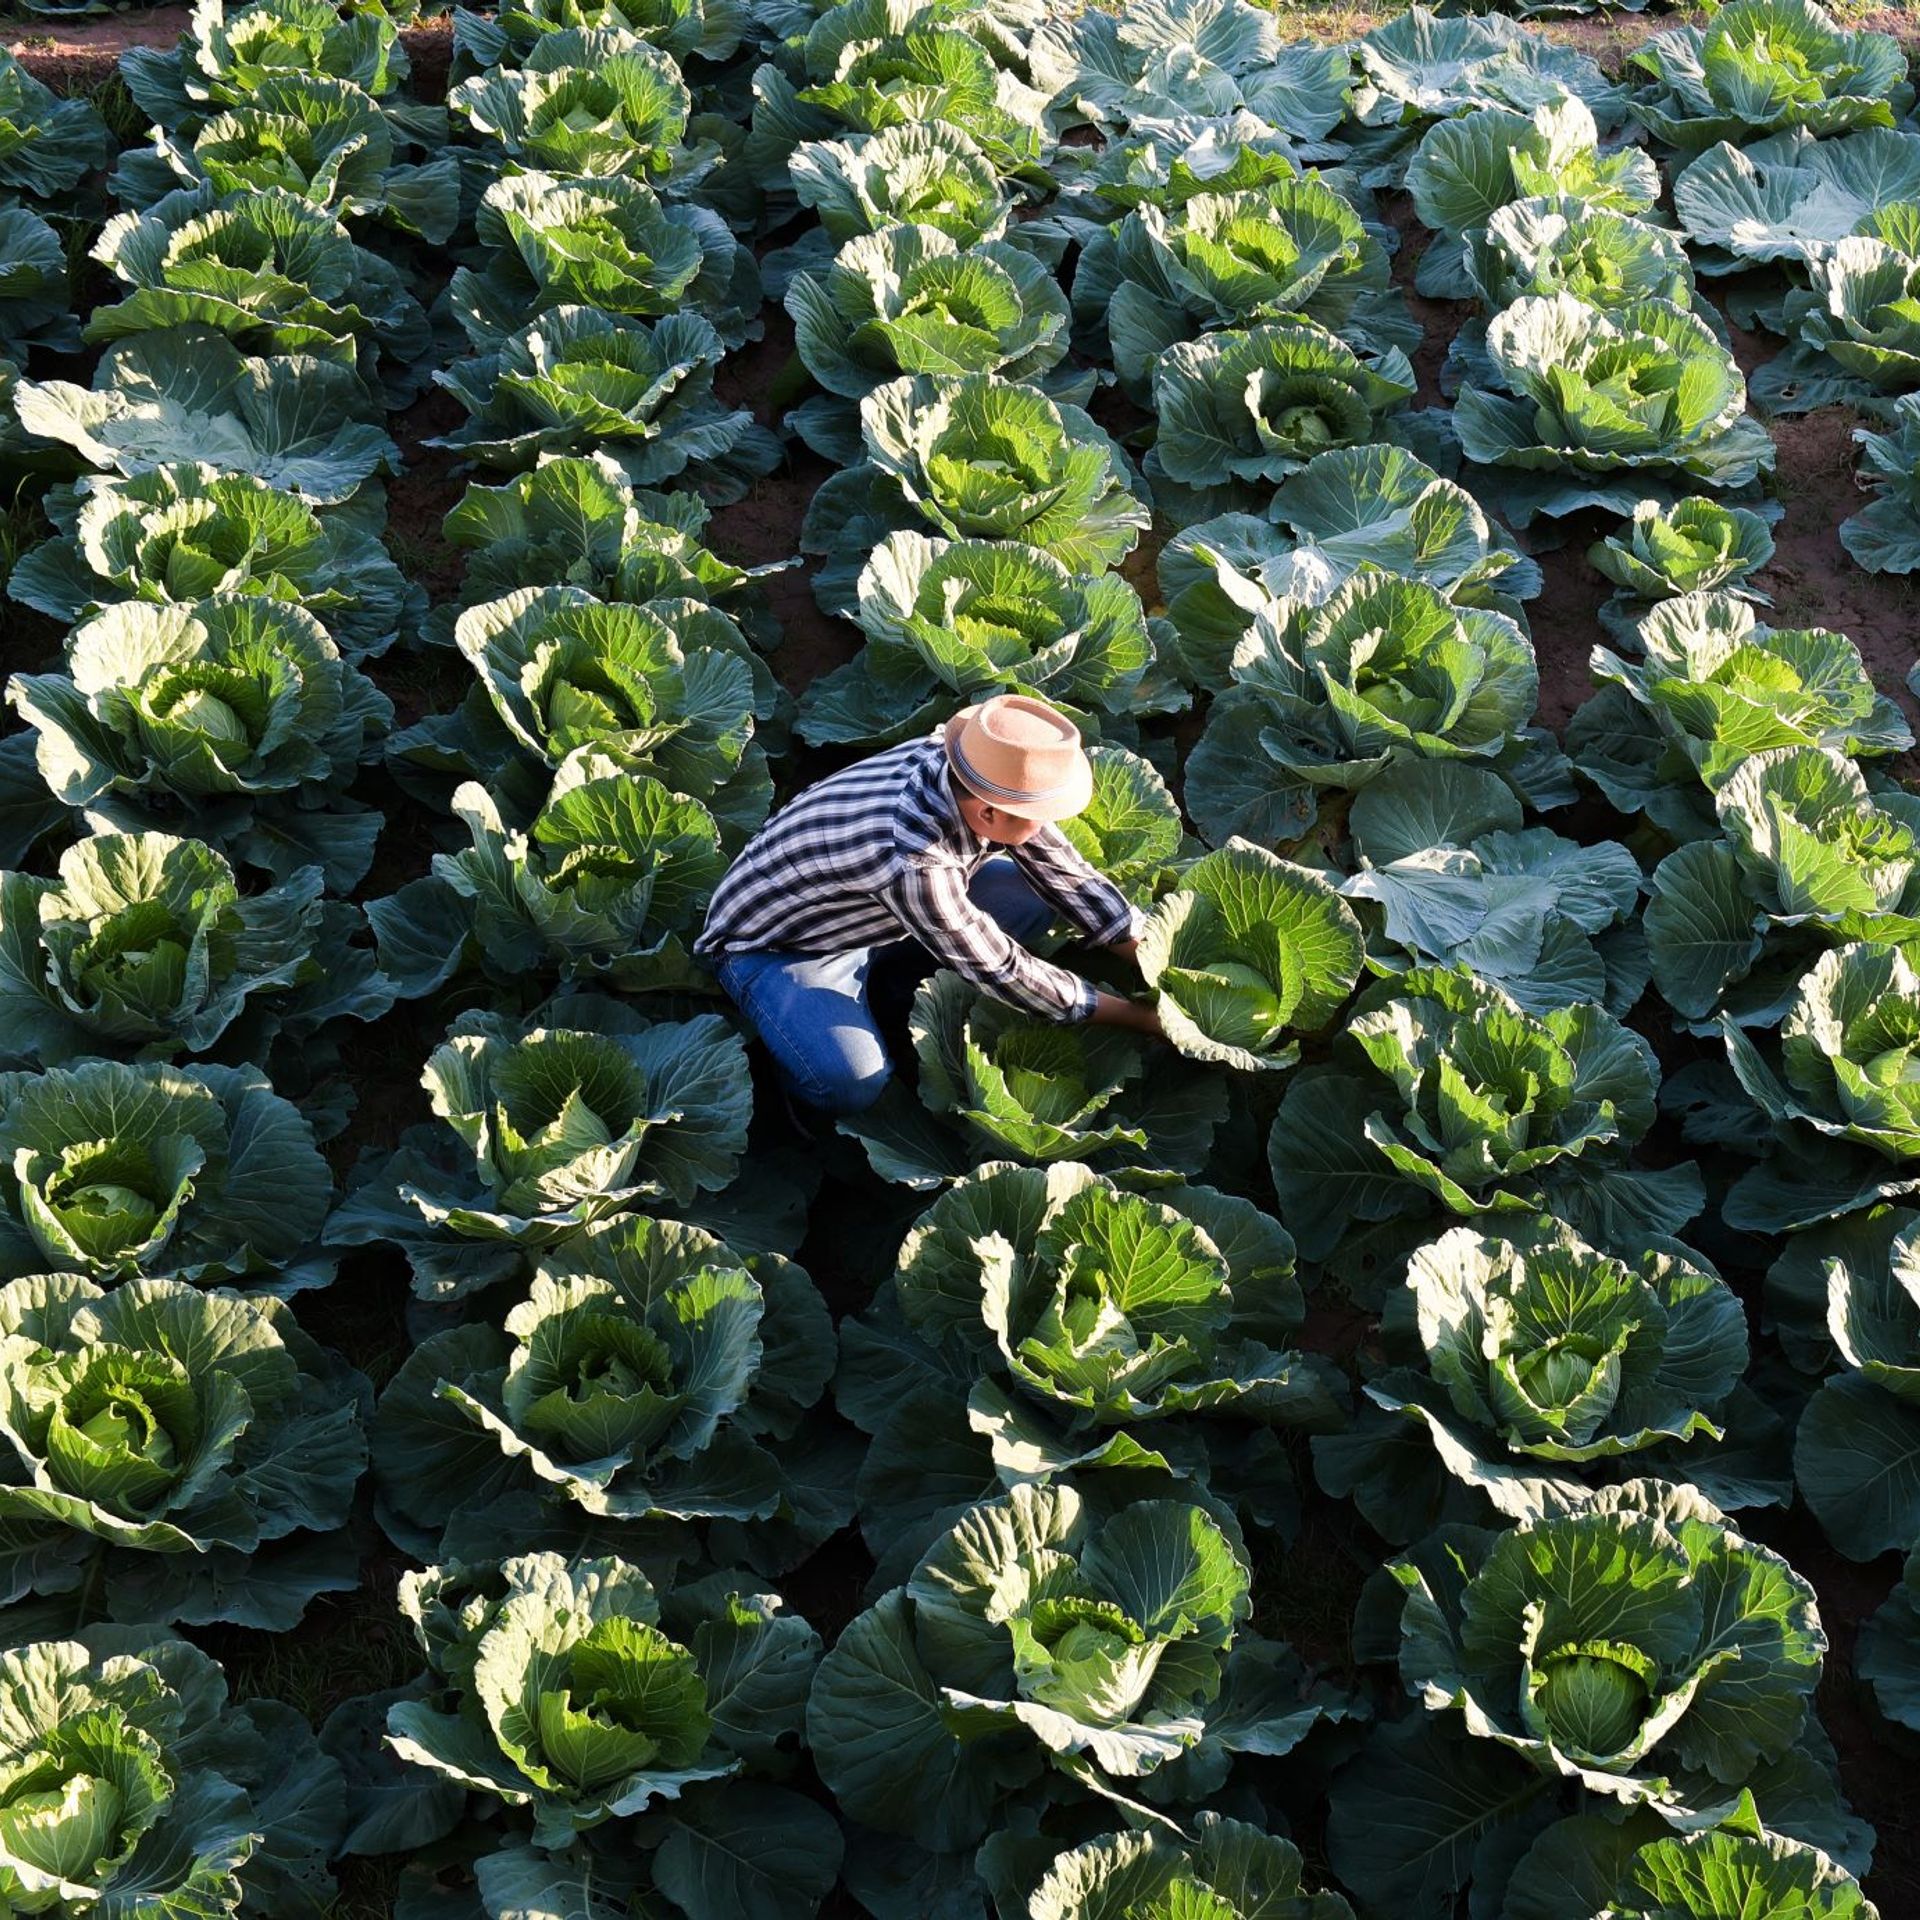 Image of a producer harvesting cabbages on a vegetable farm